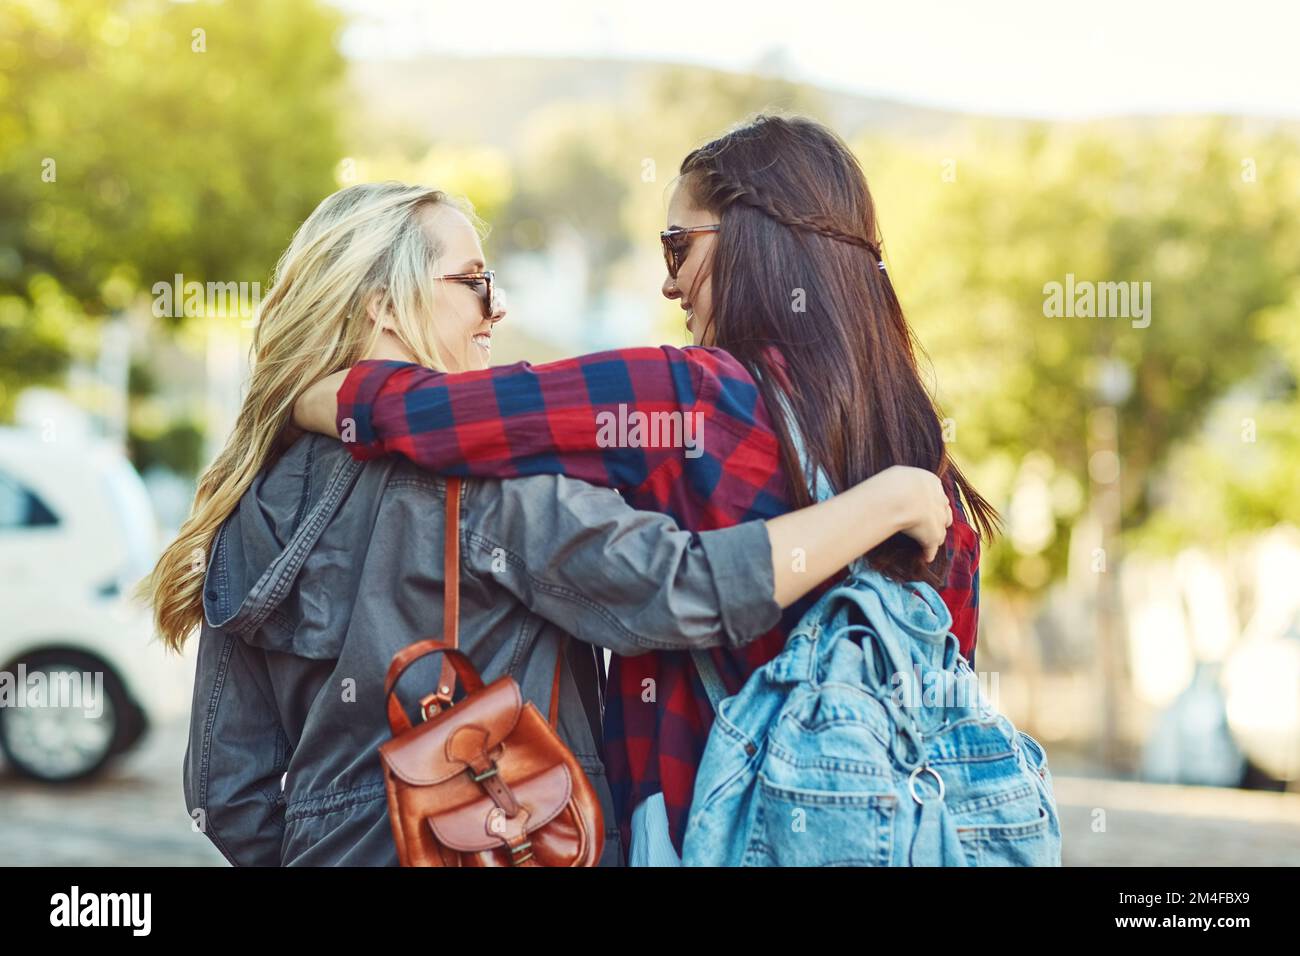 Were always ready for a new adventure. Rearview shot of two unrecognizable female friends sight seeing in the city. Stock Photo